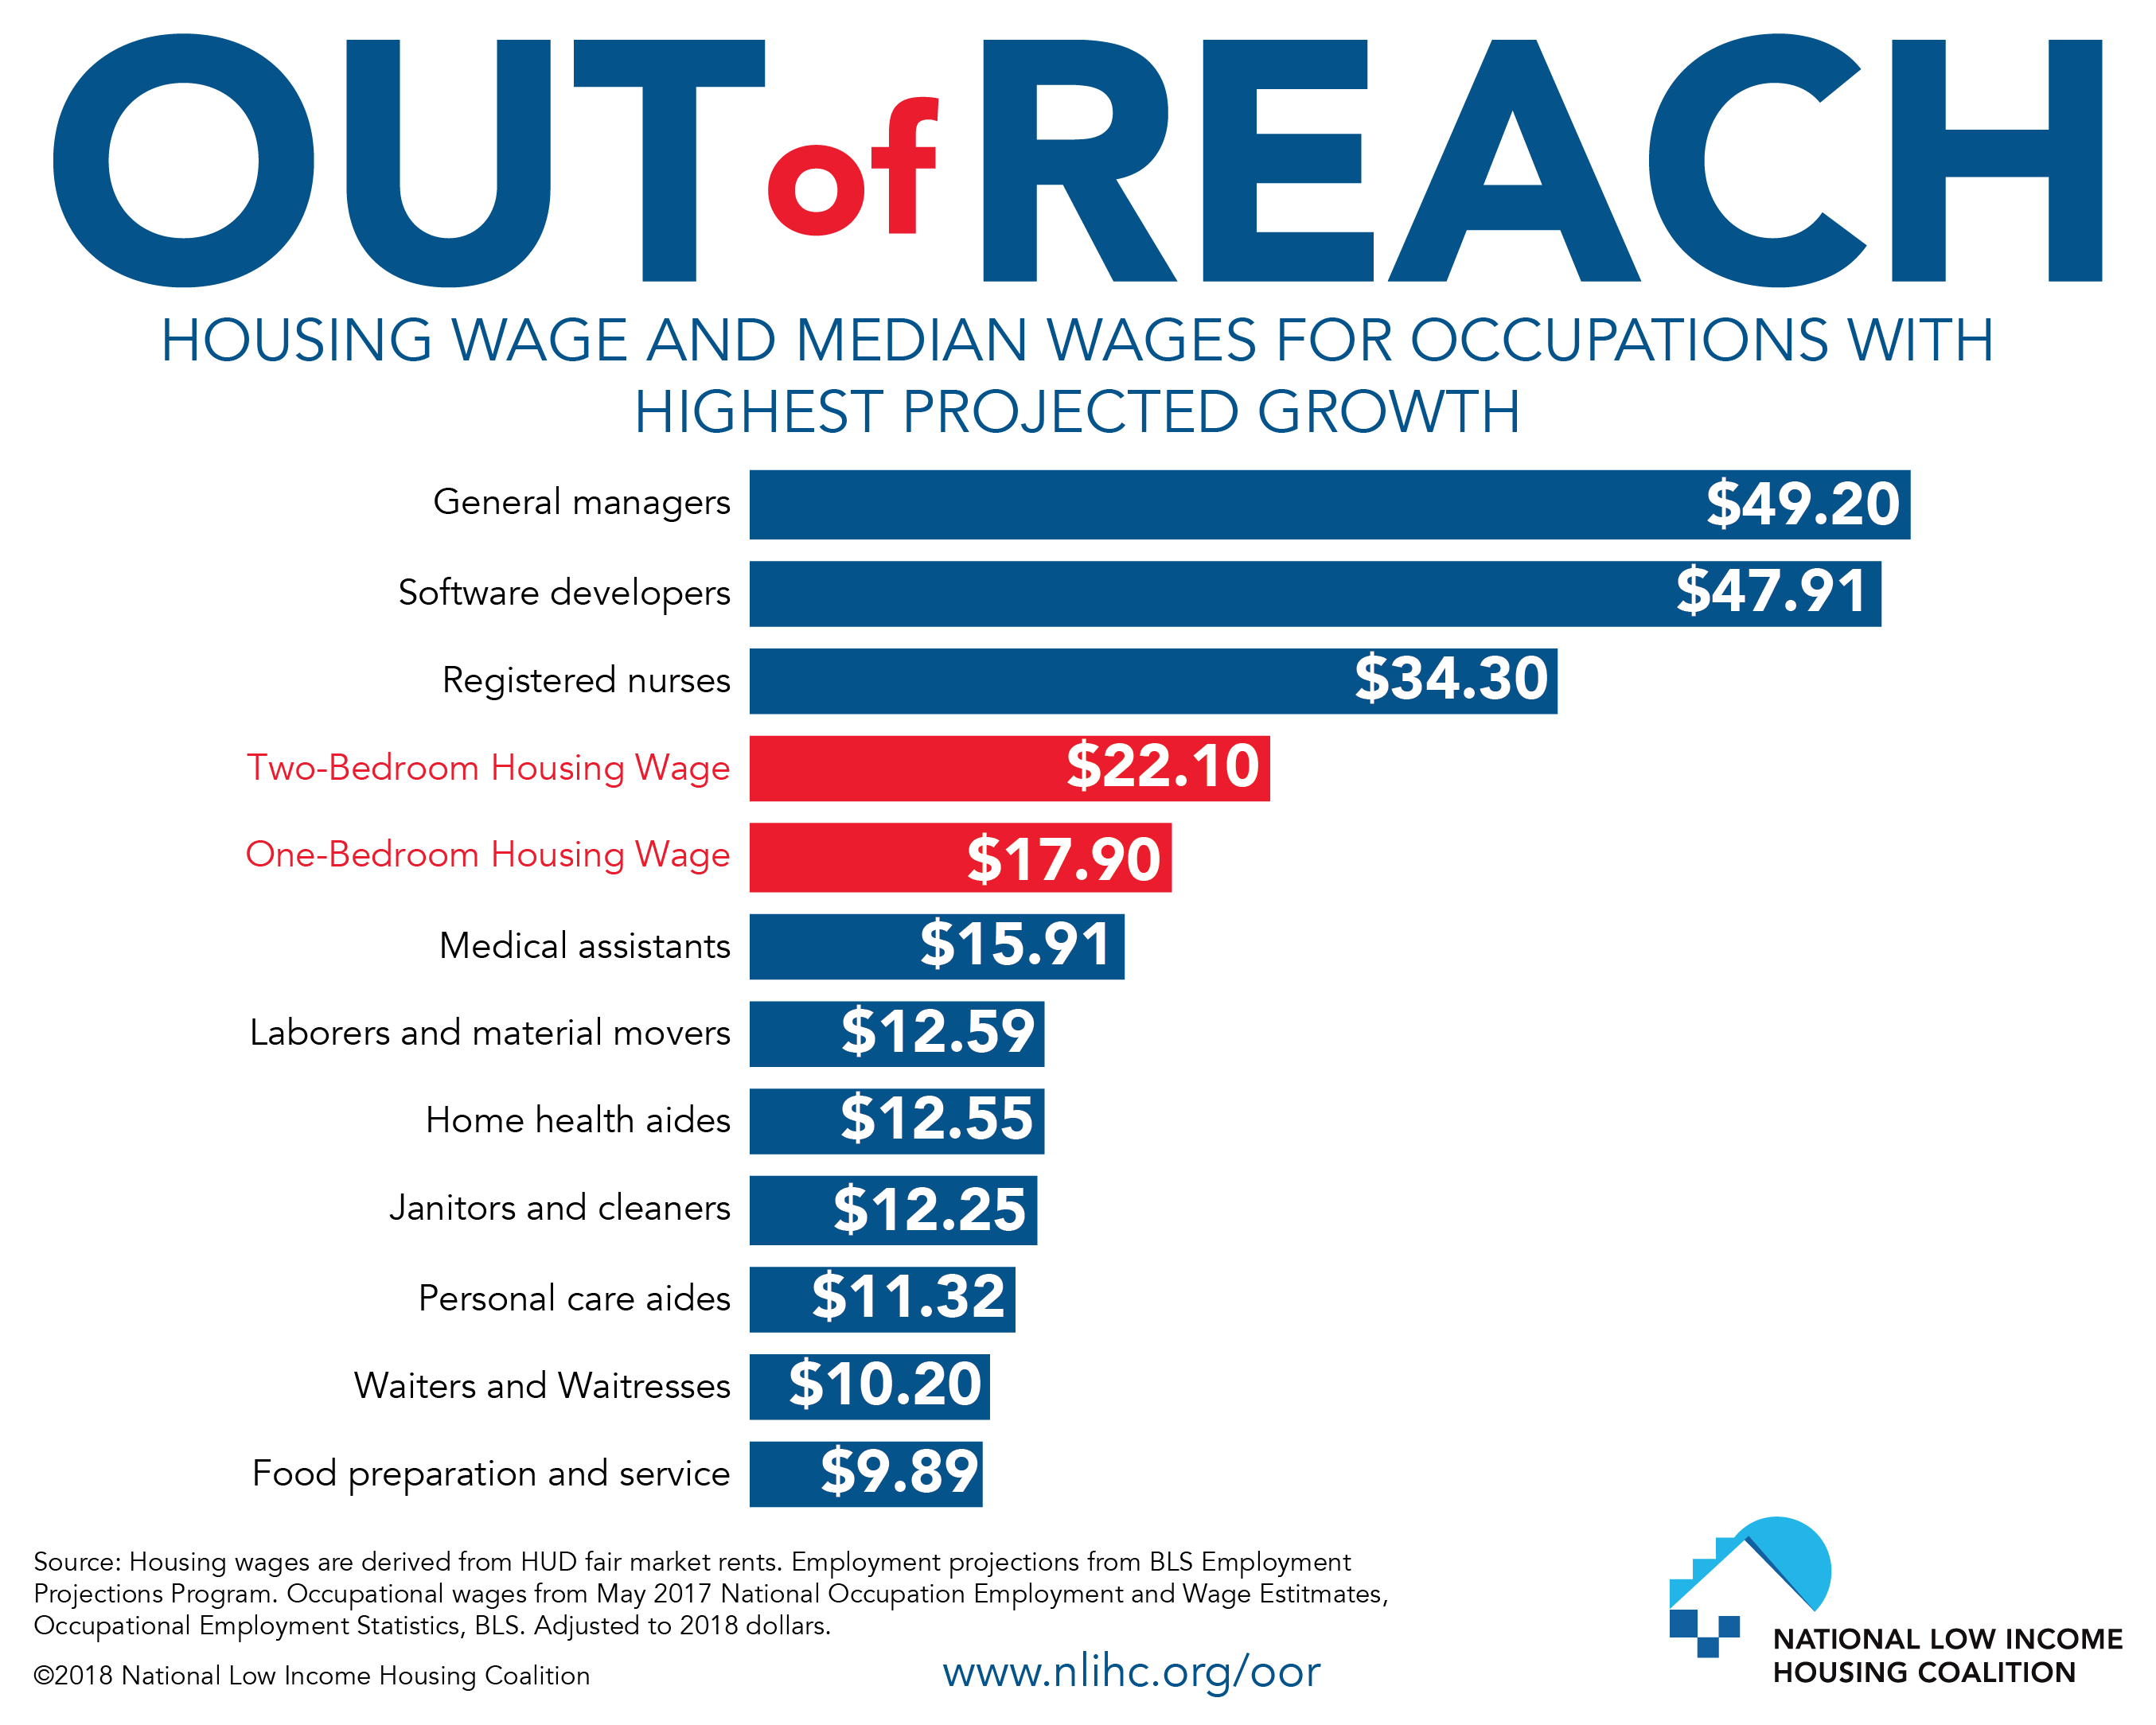 Housing Wage and Media Wates for Occupations with Highest Projected Growth